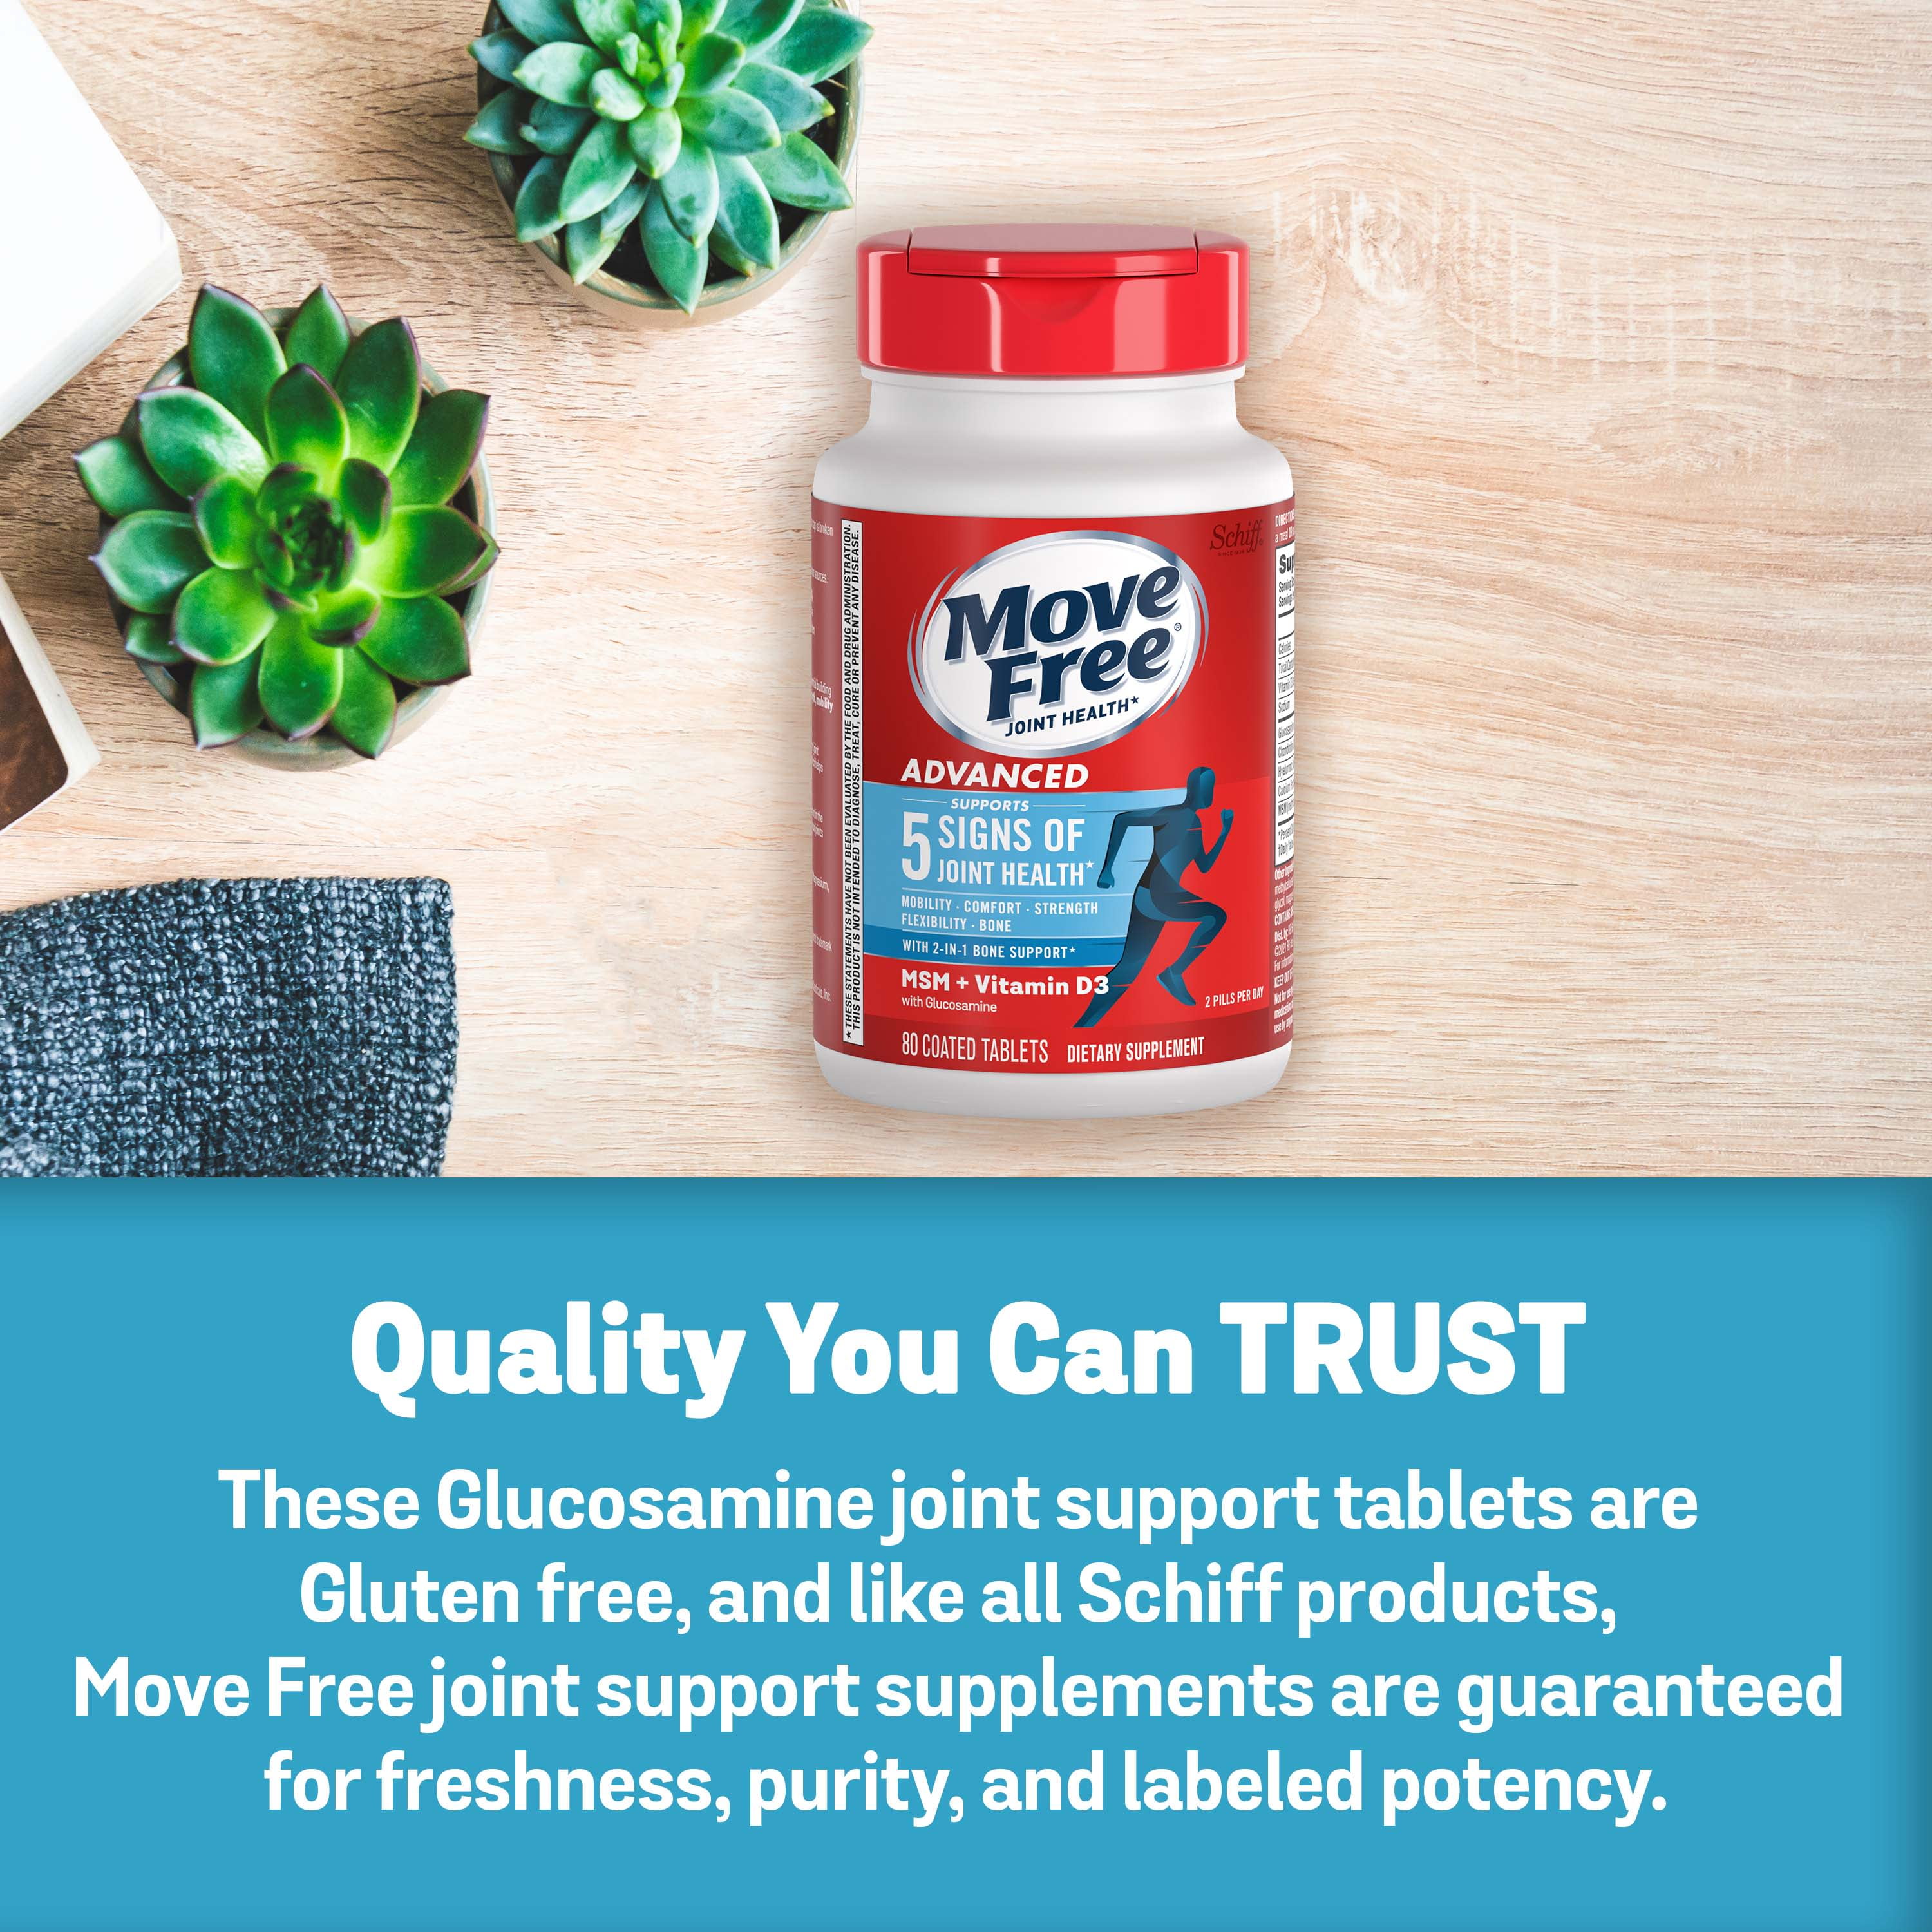 MOVE FREE® Advanced Plus MSM with Glucosamine + Chondroitin Tablets